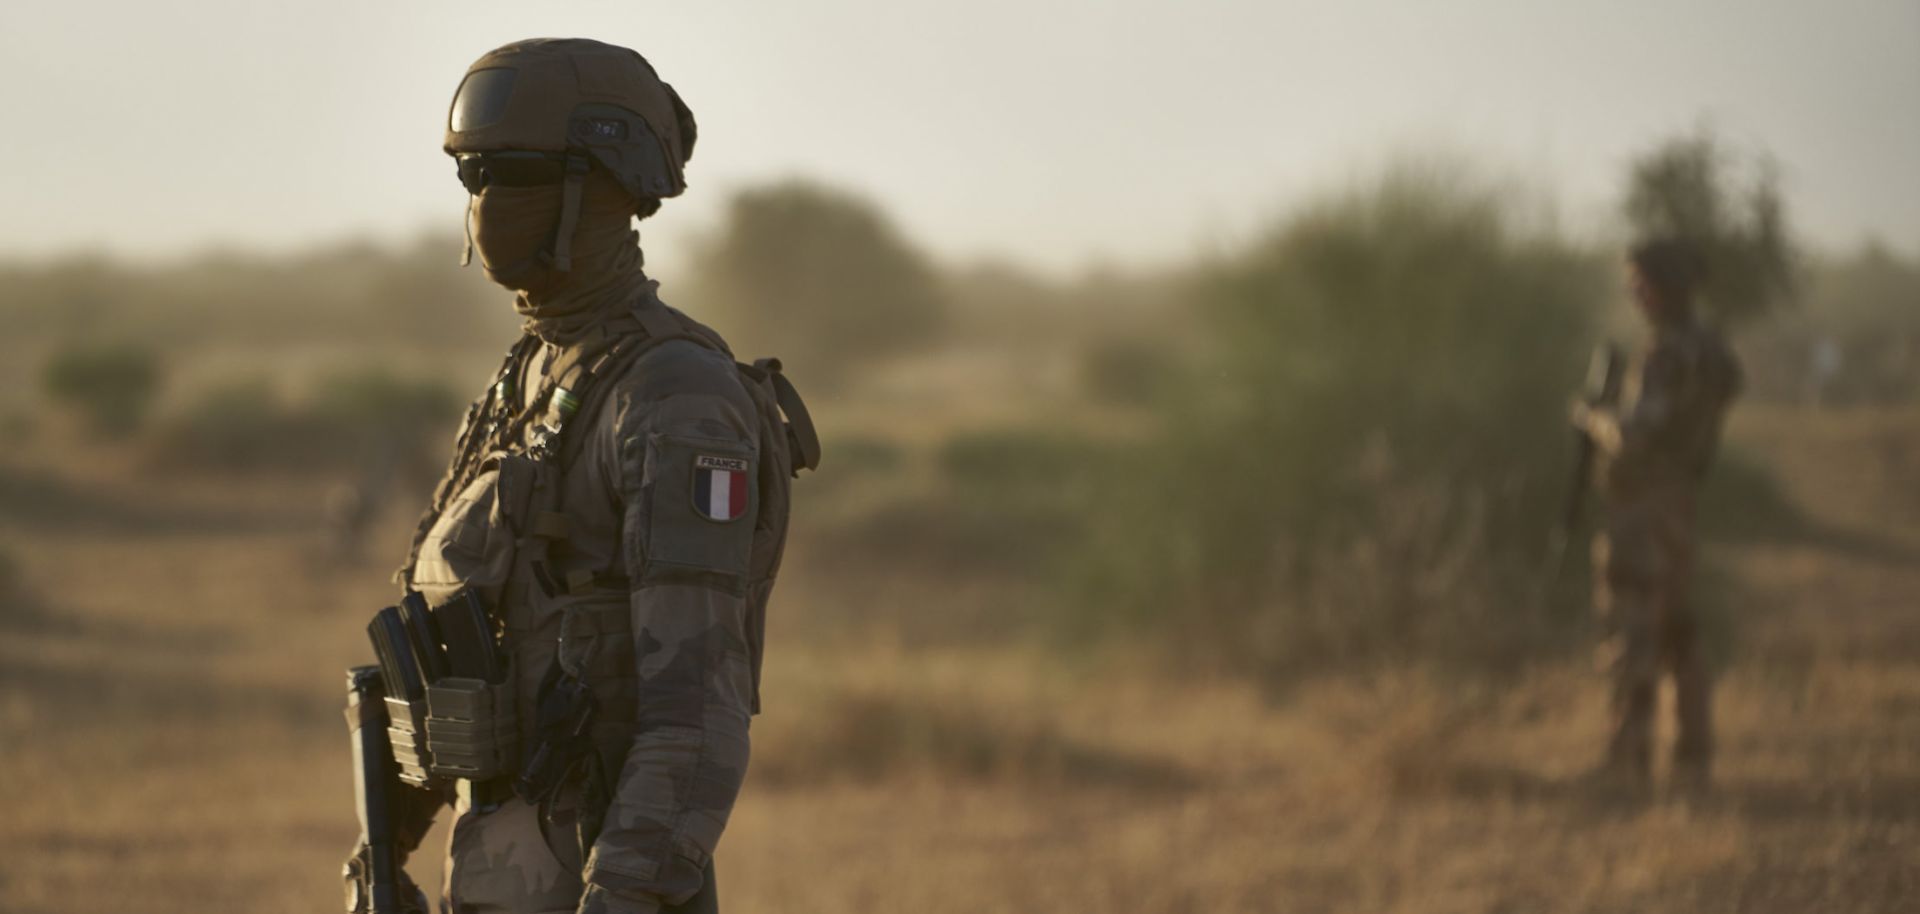 French soldiers monitor a rural area during Operation Bourgou IV on Nov. 10, 2019, in northern Burkina Faso, along the border with Mali and Niger.